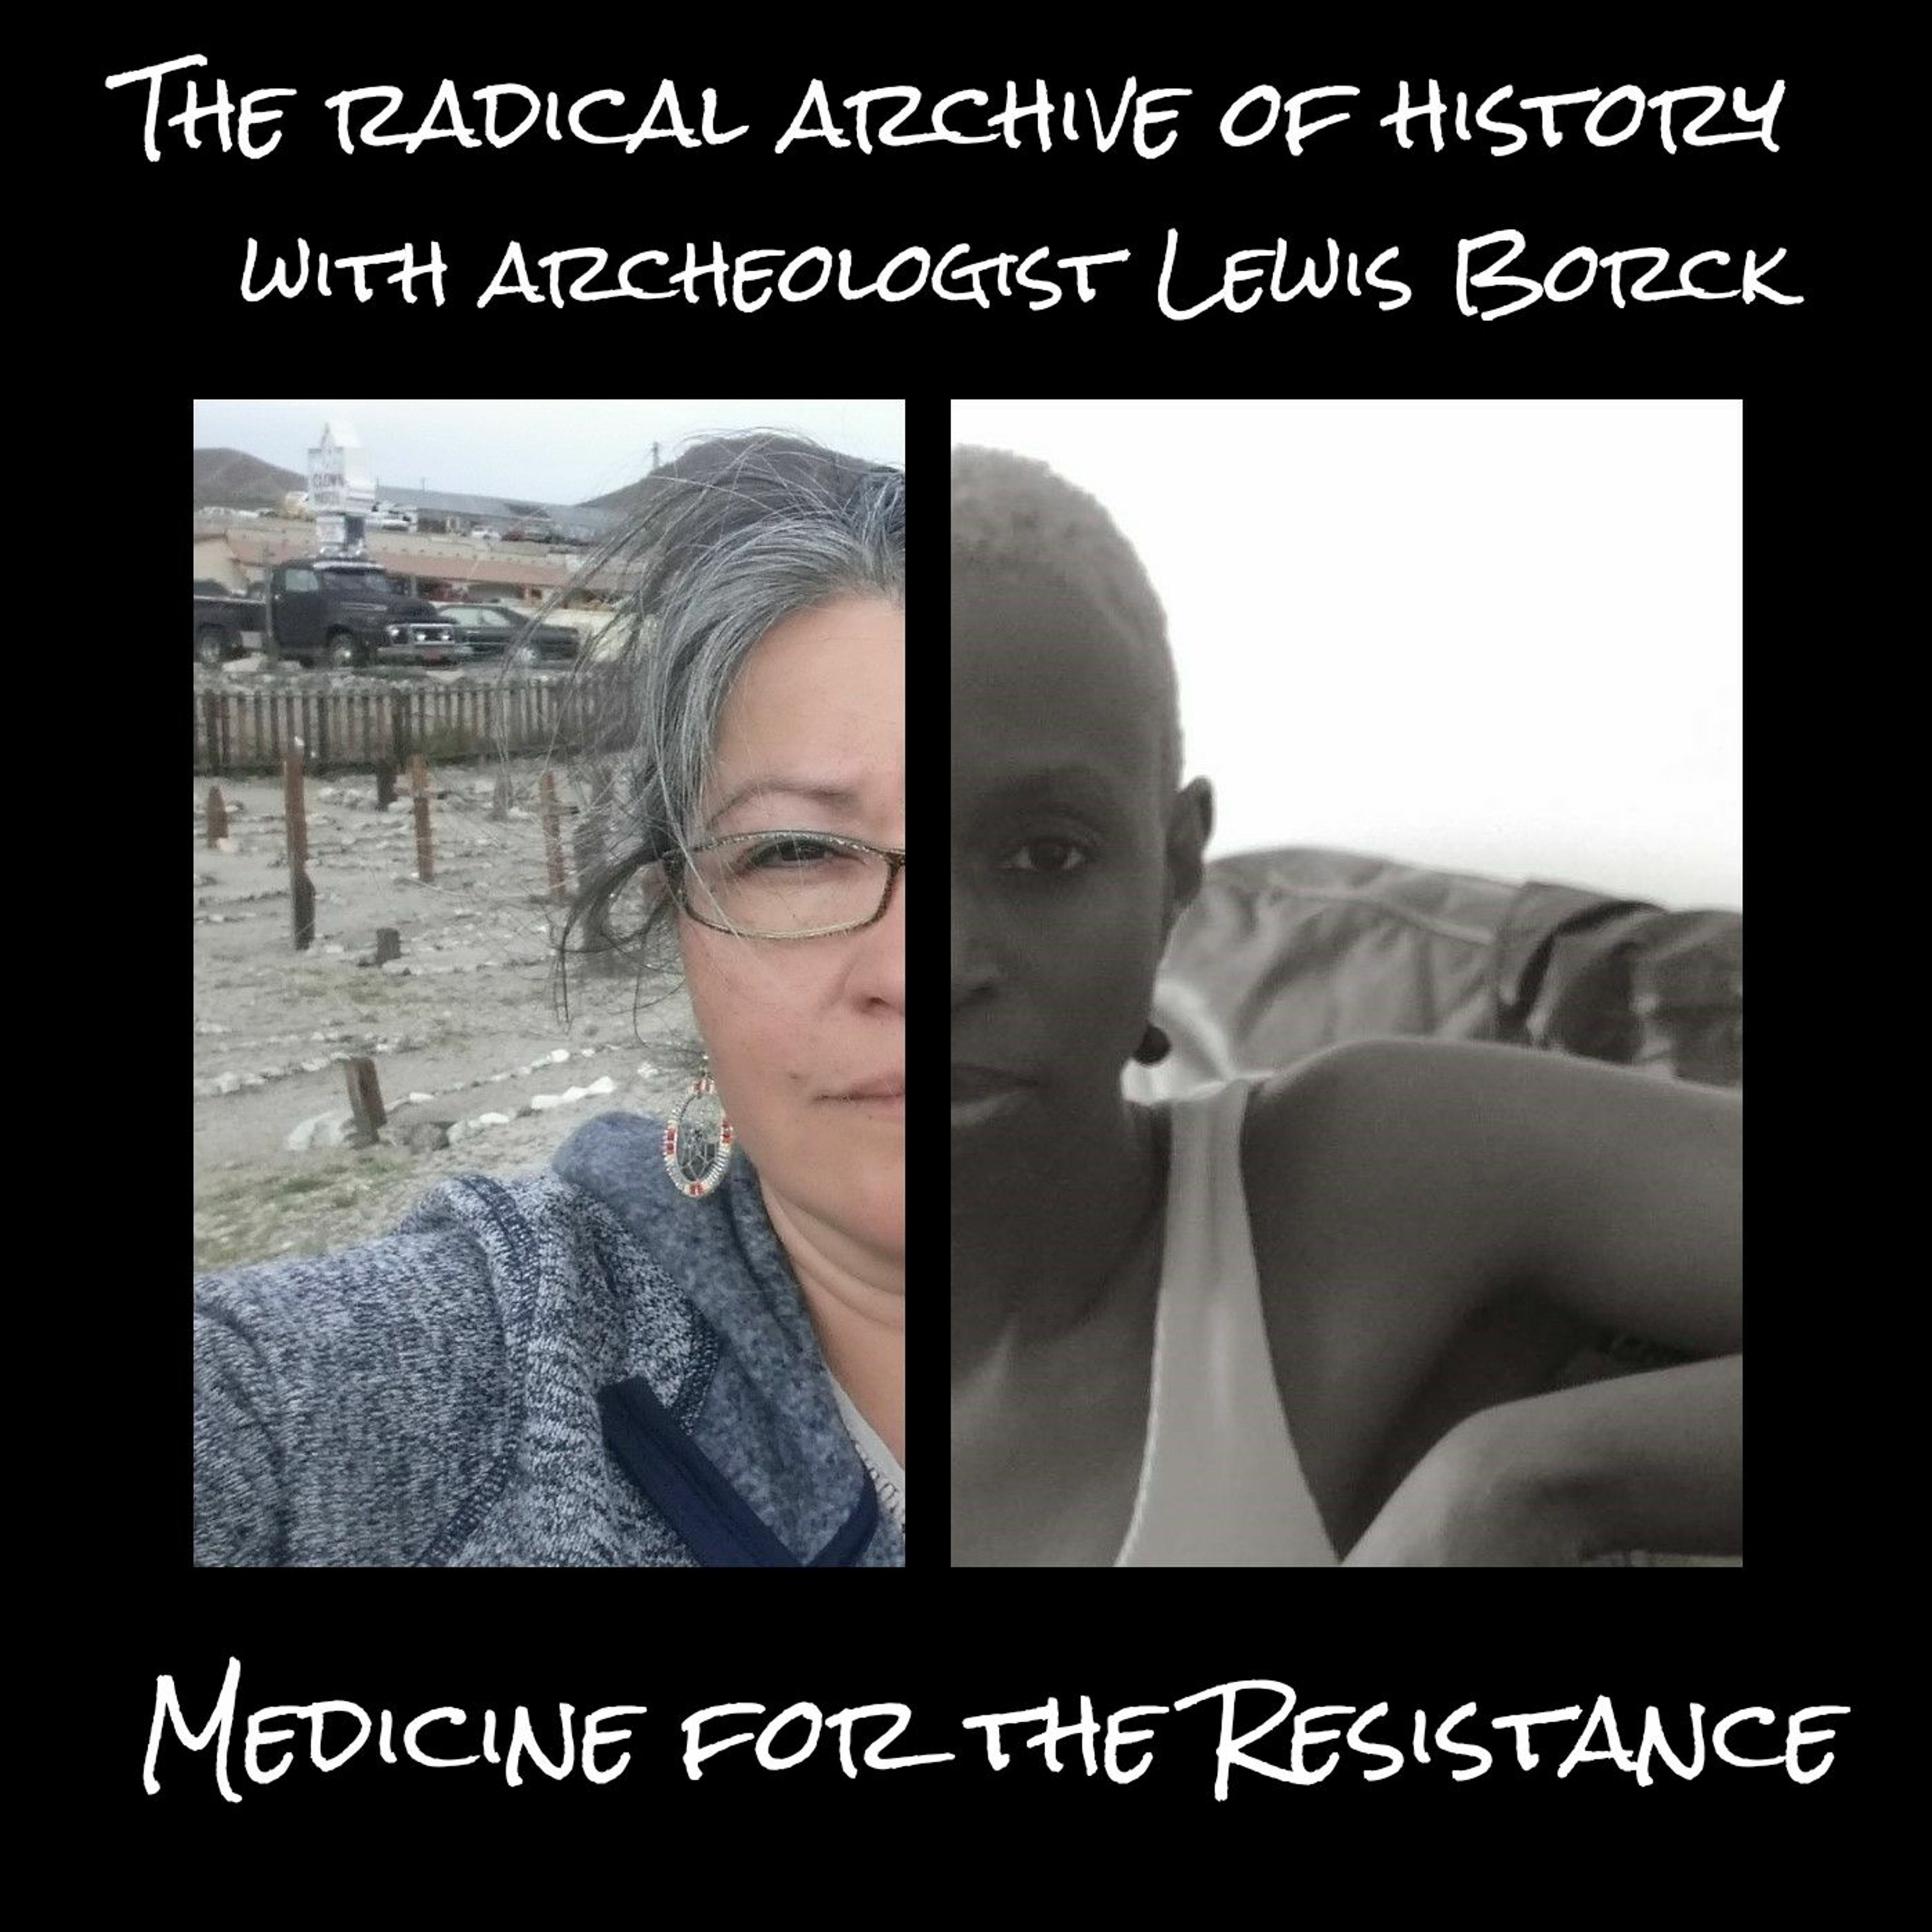 The radical archive of history with Dr. Lewis Borck